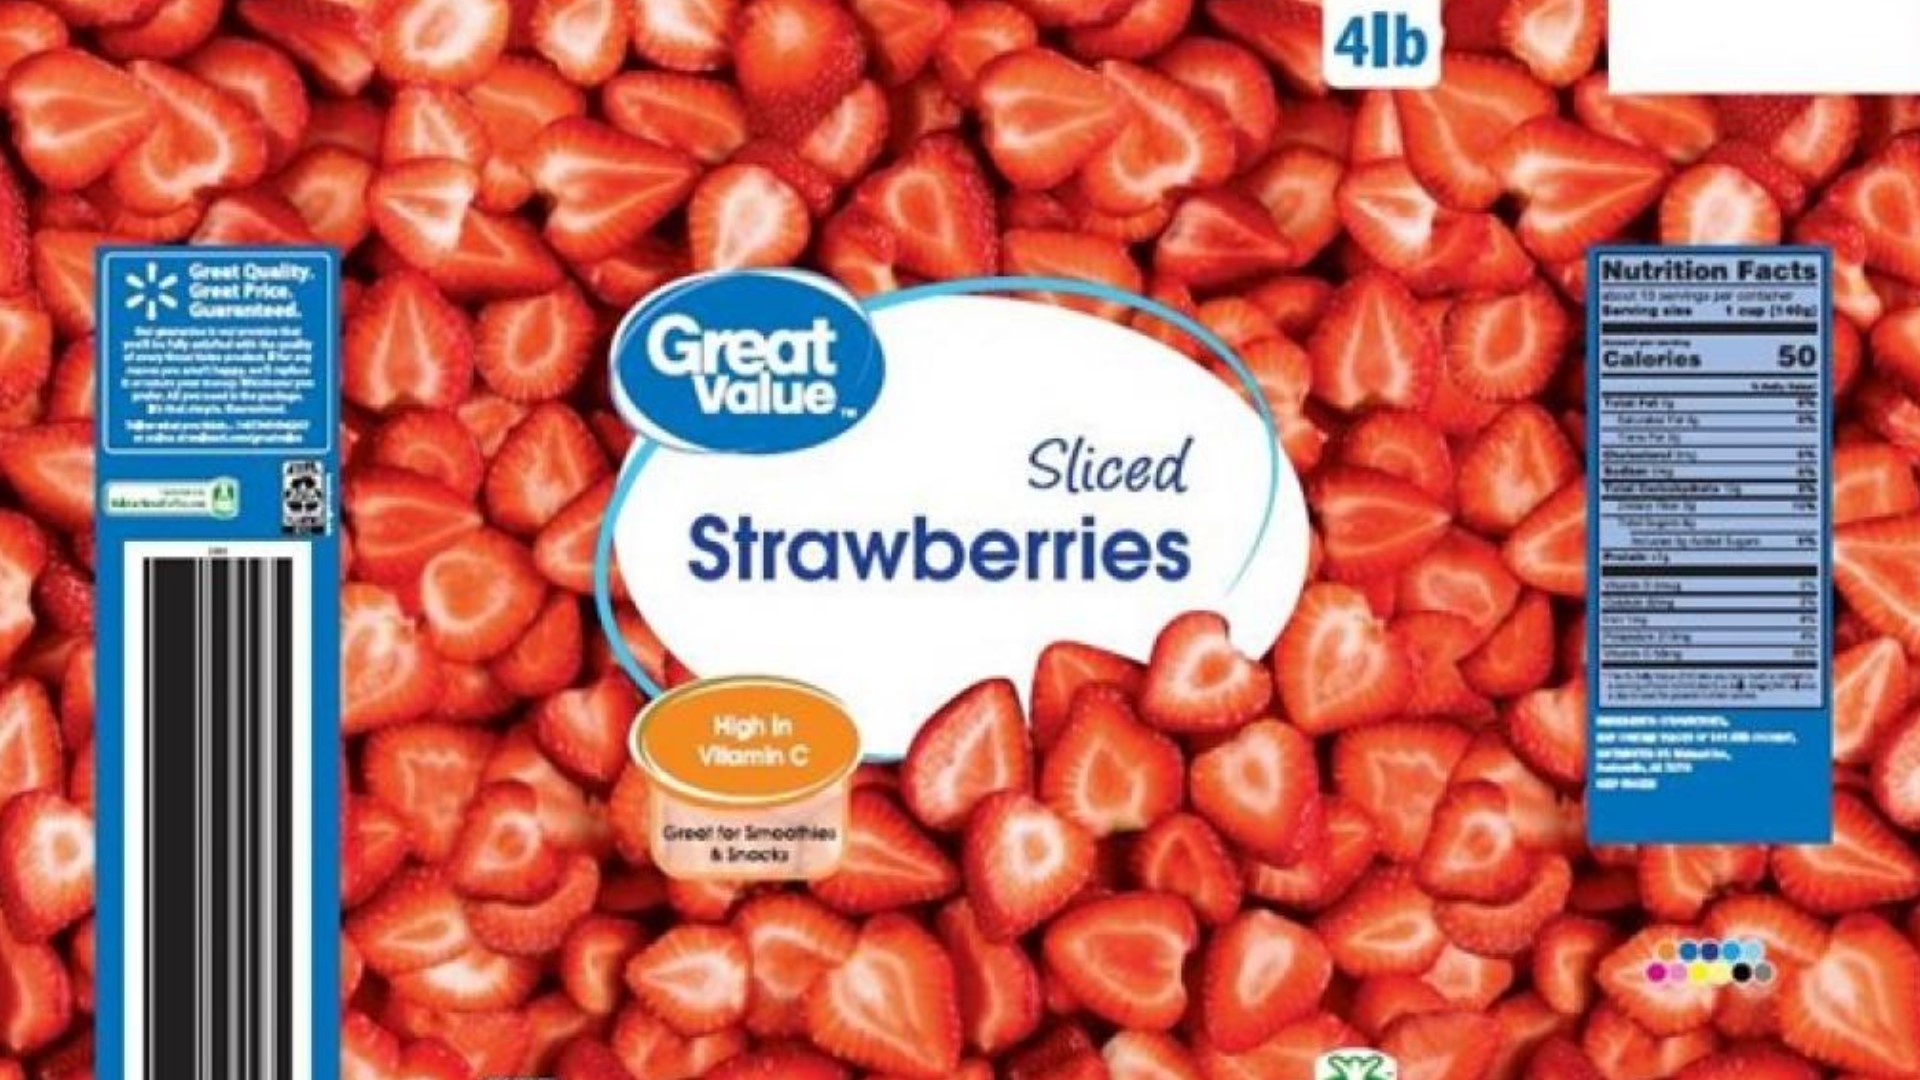 The latest recall involving frozen fruit sold at Walmart, Costco and HEB is part of an ongoing investigation linked to frozen organic strawberries.